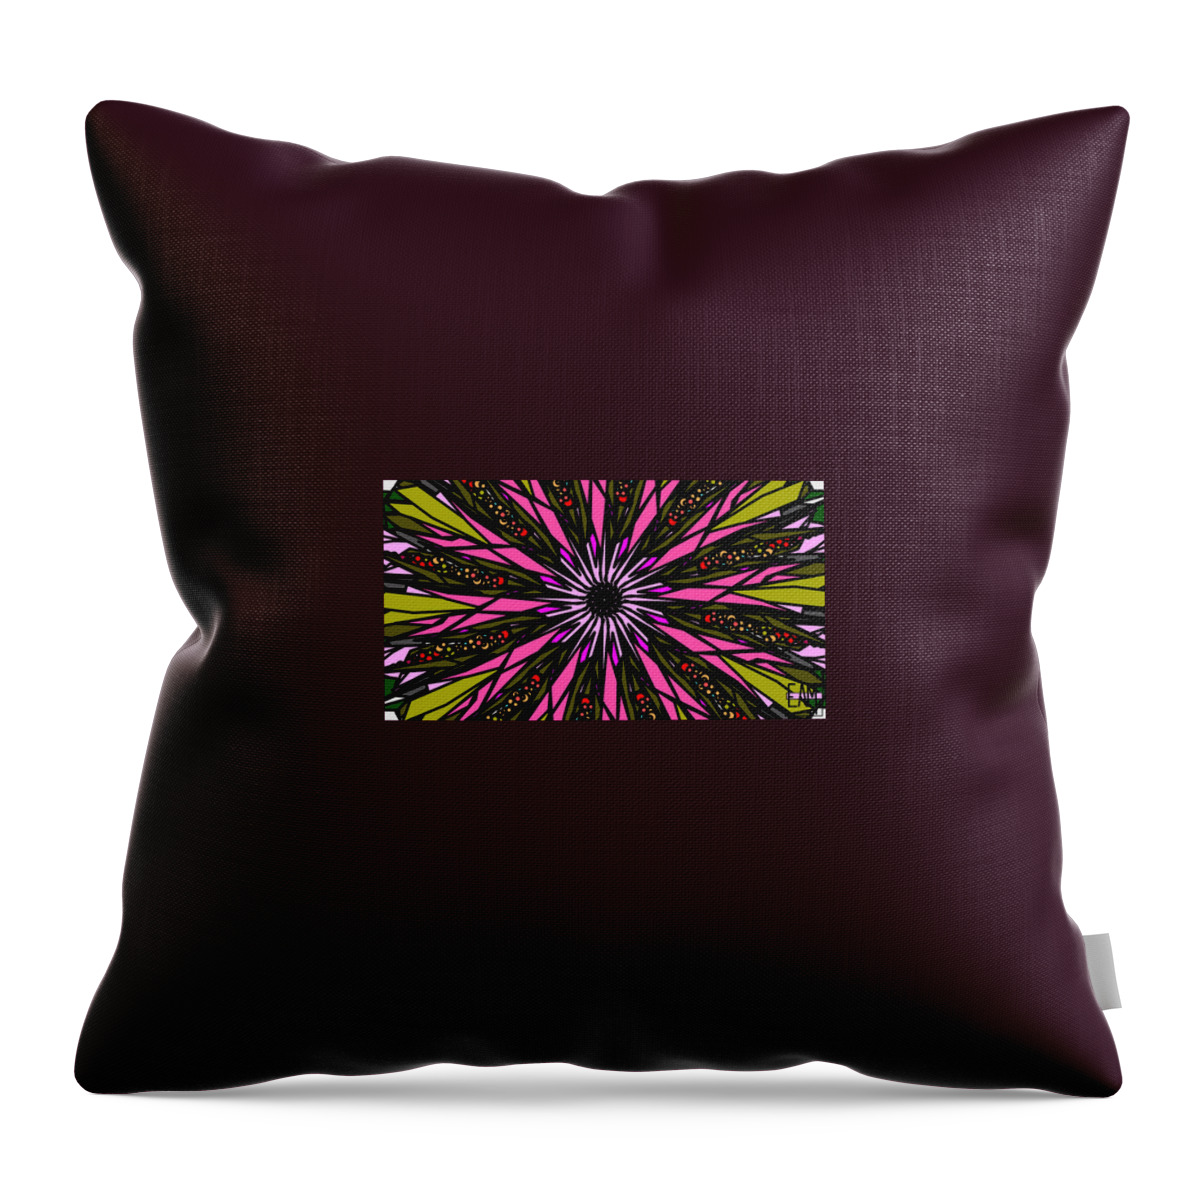 Pink Explosion Throw Pillow featuring the digital art Pink Explosion by Elizabeth McTaggart